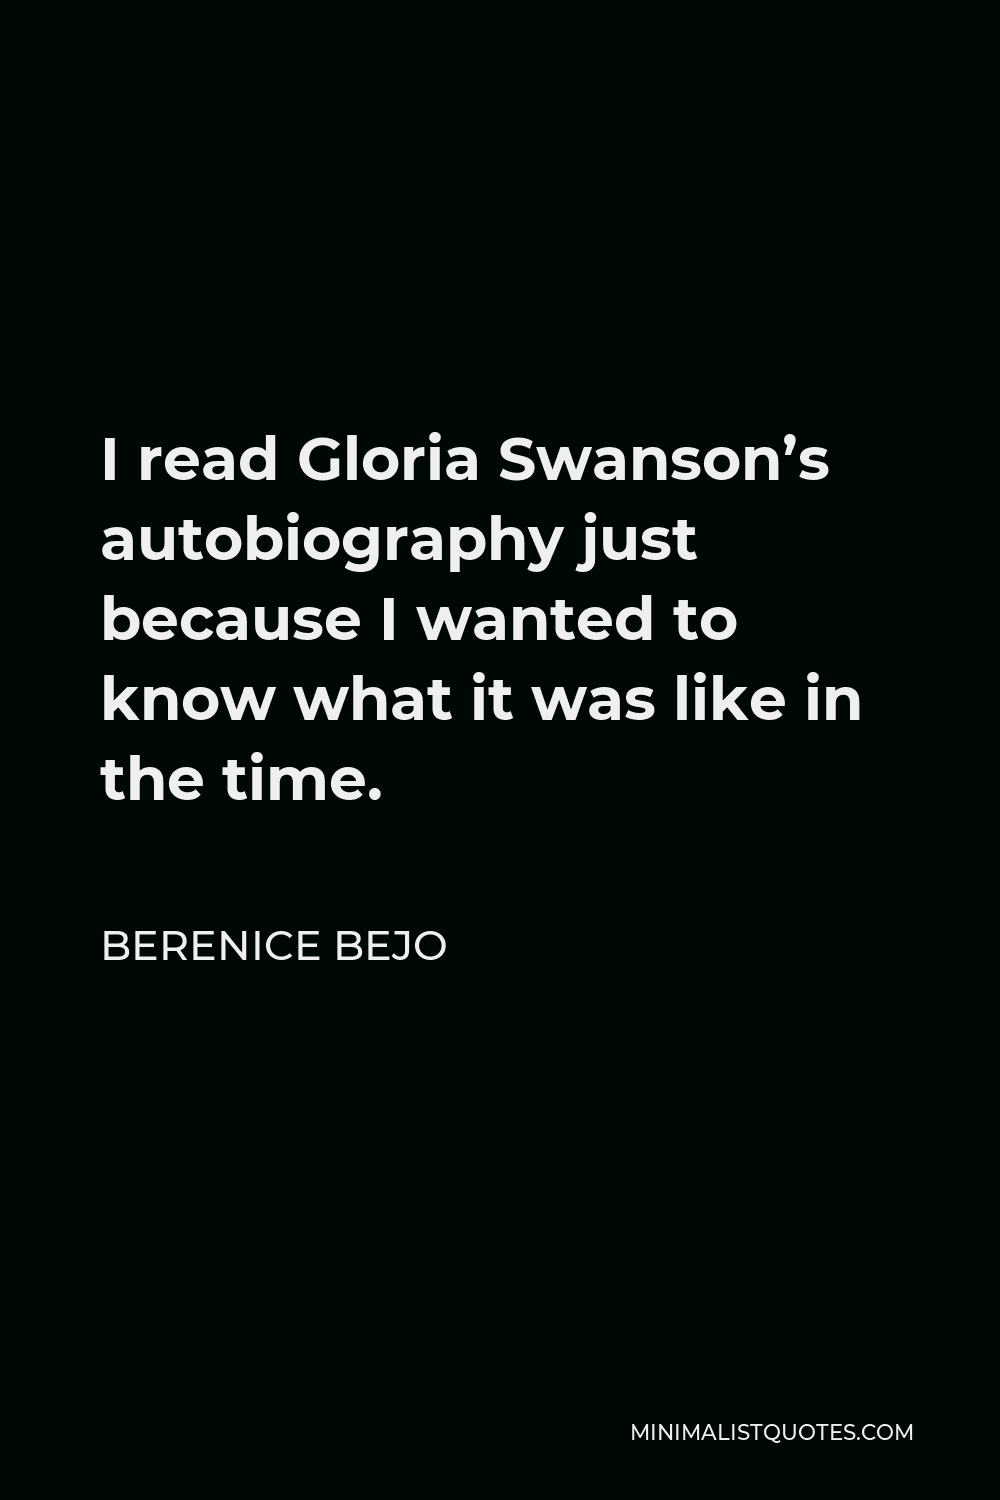 Berenice Bejo Quote - I read Gloria Swanson’s autobiography just because I wanted to know what it was like in the time.